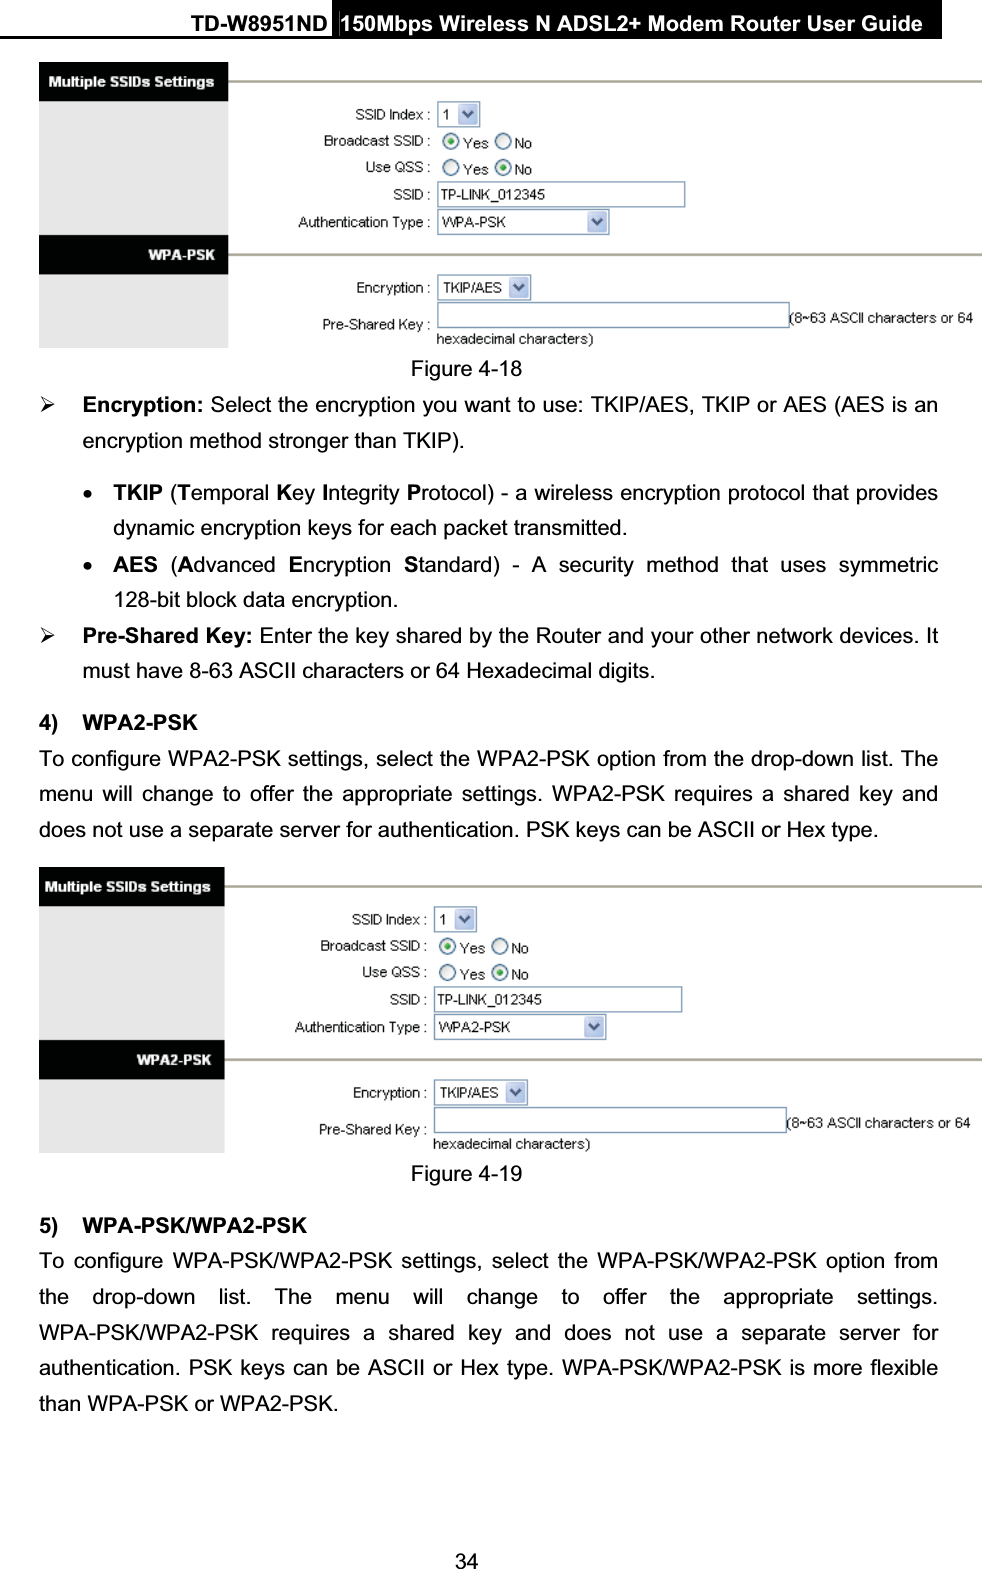 TD-W8951ND  150Mbps Wireless N ADSL2+ Modem Router User Guide34Figure 4-18 ¾Encryption: Select the encryption you want to use: TKIP/AES, TKIP or AES (AES is an encryption method stronger than TKIP). xTKIP (Temporal Key Integrity Protocol) - a wireless encryption protocol that provides dynamic encryption keys for each packet transmitted. xAES (Advanced  Encryption Standard) - A security method that uses symmetric 128-bit block data encryption. ¾Pre-Shared Key: Enter the key shared by the Router and your other network devices. It must have 8-63 ASCII characters or 64 Hexadecimal digits. 4) WPA2-PSK To configure WPA2-PSK settings, select the WPA2-PSK option from the drop-down list. The menu will change to offer the appropriate settings. WPA2-PSK requires a shared key and does not use a separate server for authentication. PSK keys can be ASCII or Hex type. Figure 4-19 5) WPA-PSK/WPA2-PSK To configure WPA-PSK/WPA2-PSK settings, select the WPA-PSK/WPA2-PSK option from the drop-down list. The menu will change to offer the appropriate settings. WPA-PSK/WPA2-PSK requires a shared key and does not use a separate server for authentication. PSK keys can be ASCII or Hex type. WPA-PSK/WPA2-PSK is more flexible than WPA-PSK or WPA2-PSK. 